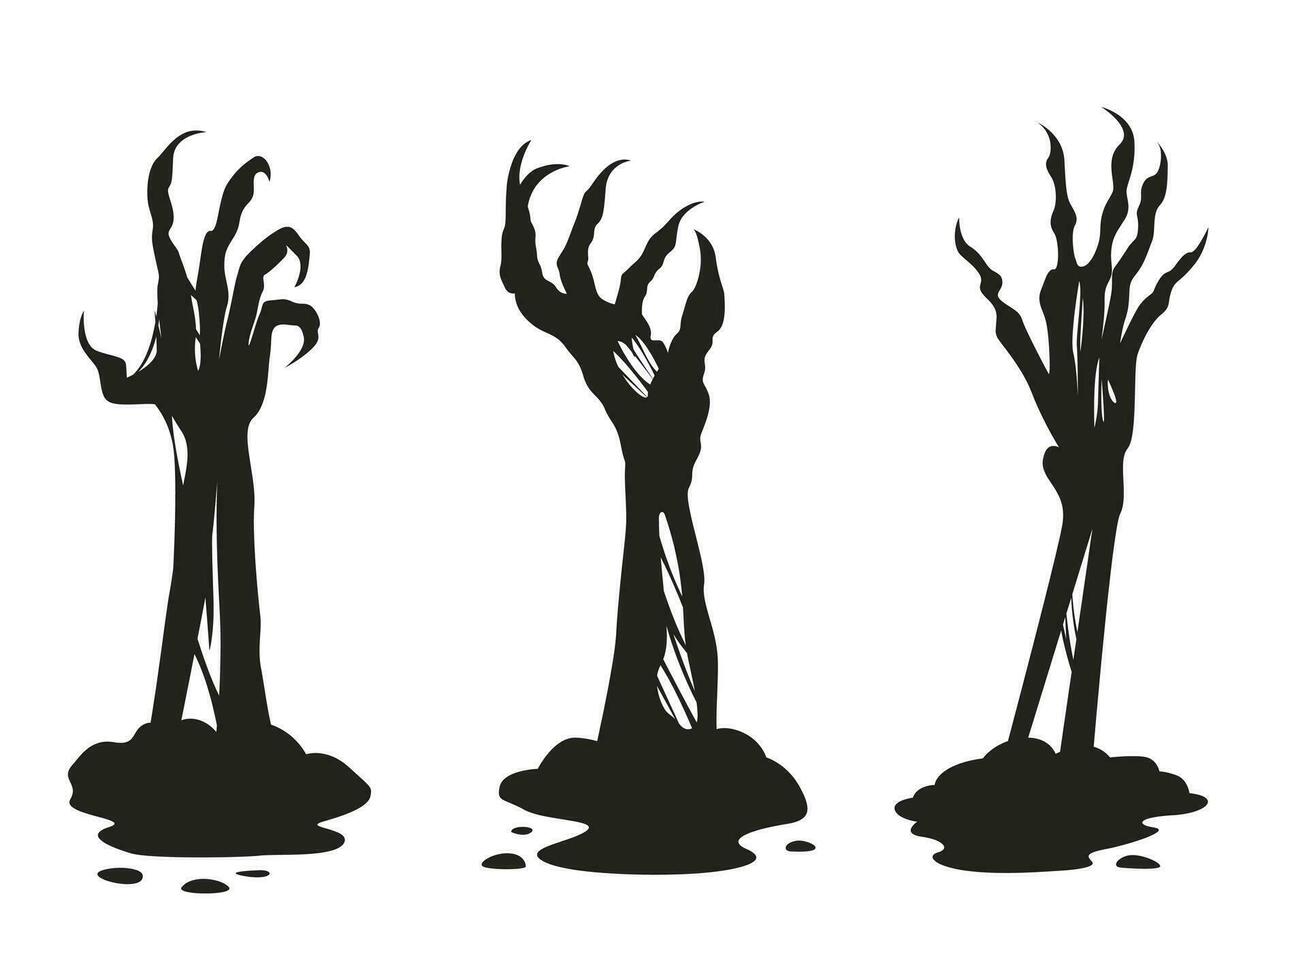 zombie arms. Halloween creepy hands sticking out of ground vector